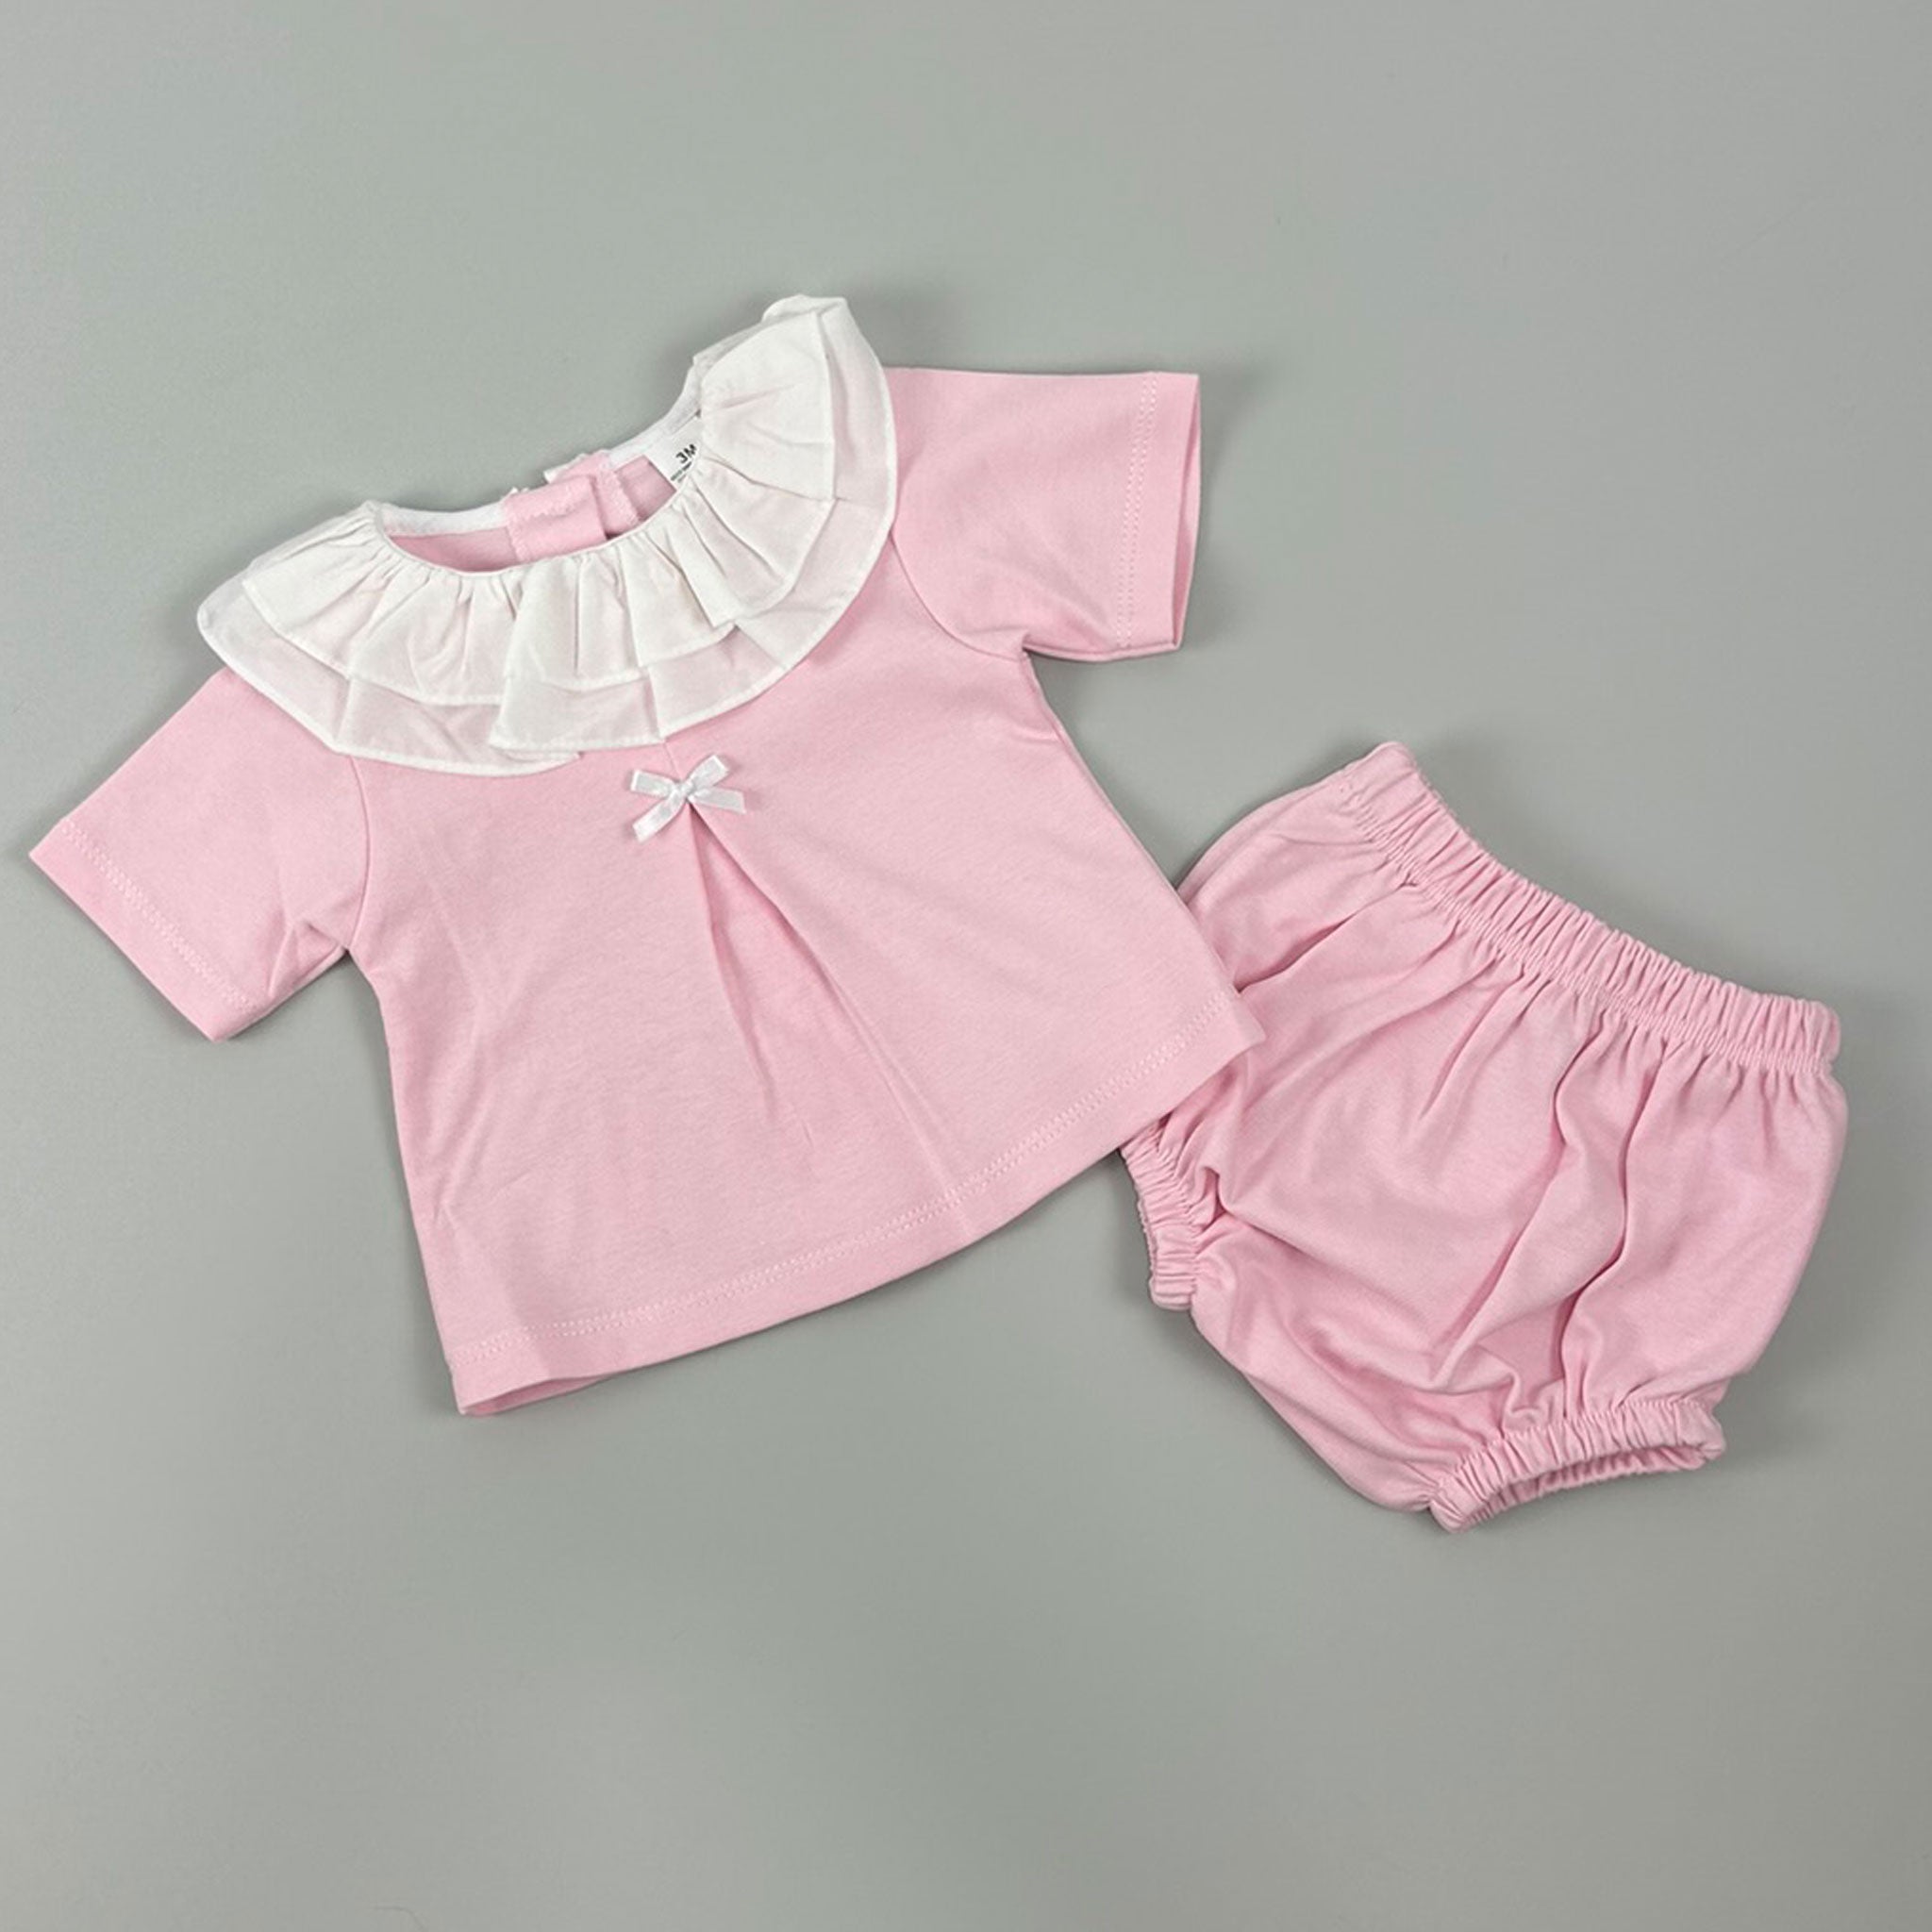 Baby Girls Pink Cotton Summer Outfit with Ruffle Collar